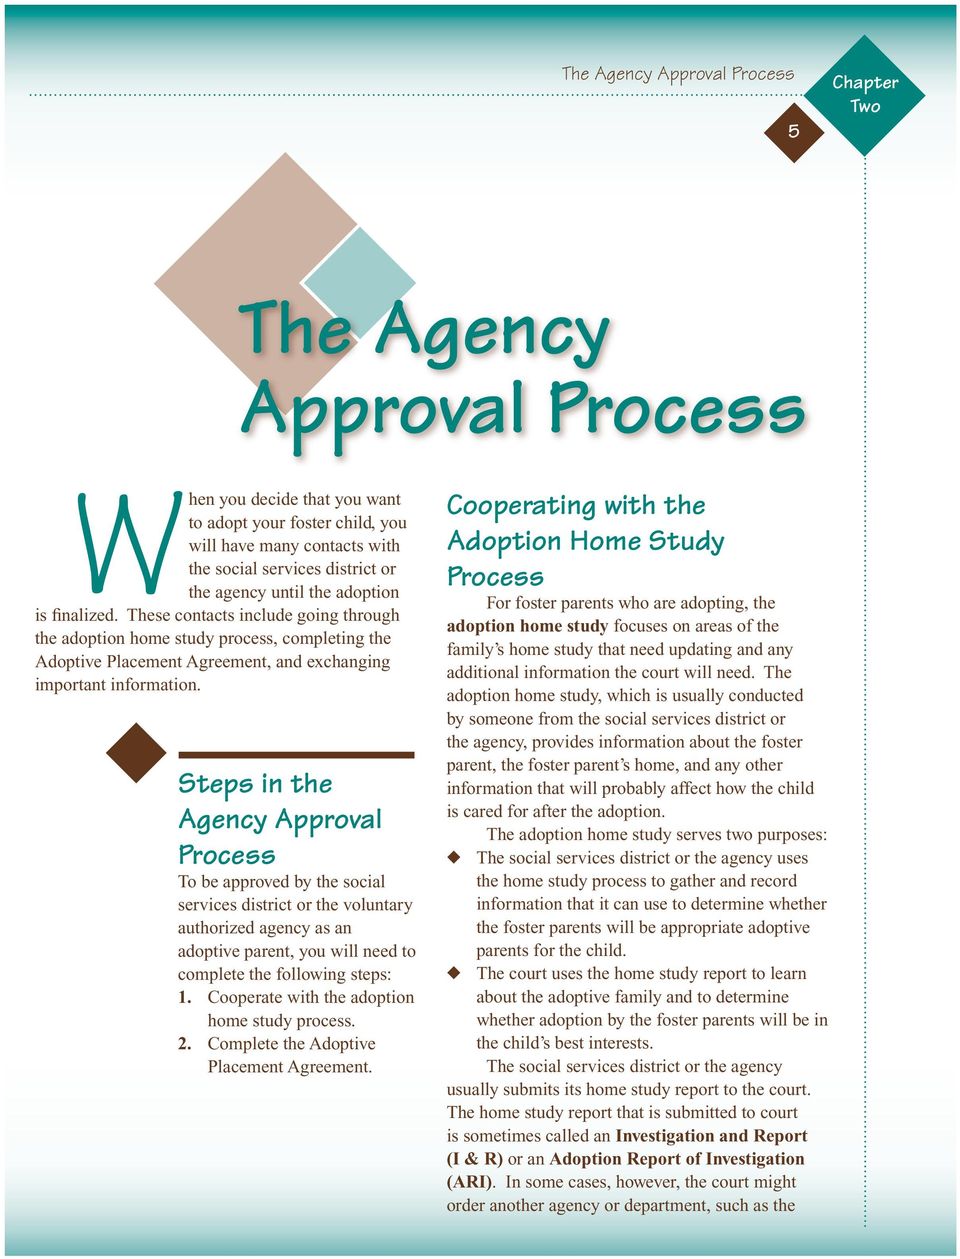 Steps in the Agency Approval Process To be approved by the social services district or the voluntary authorized agency as an adoptive parent, you will need to complete the following steps: 1.